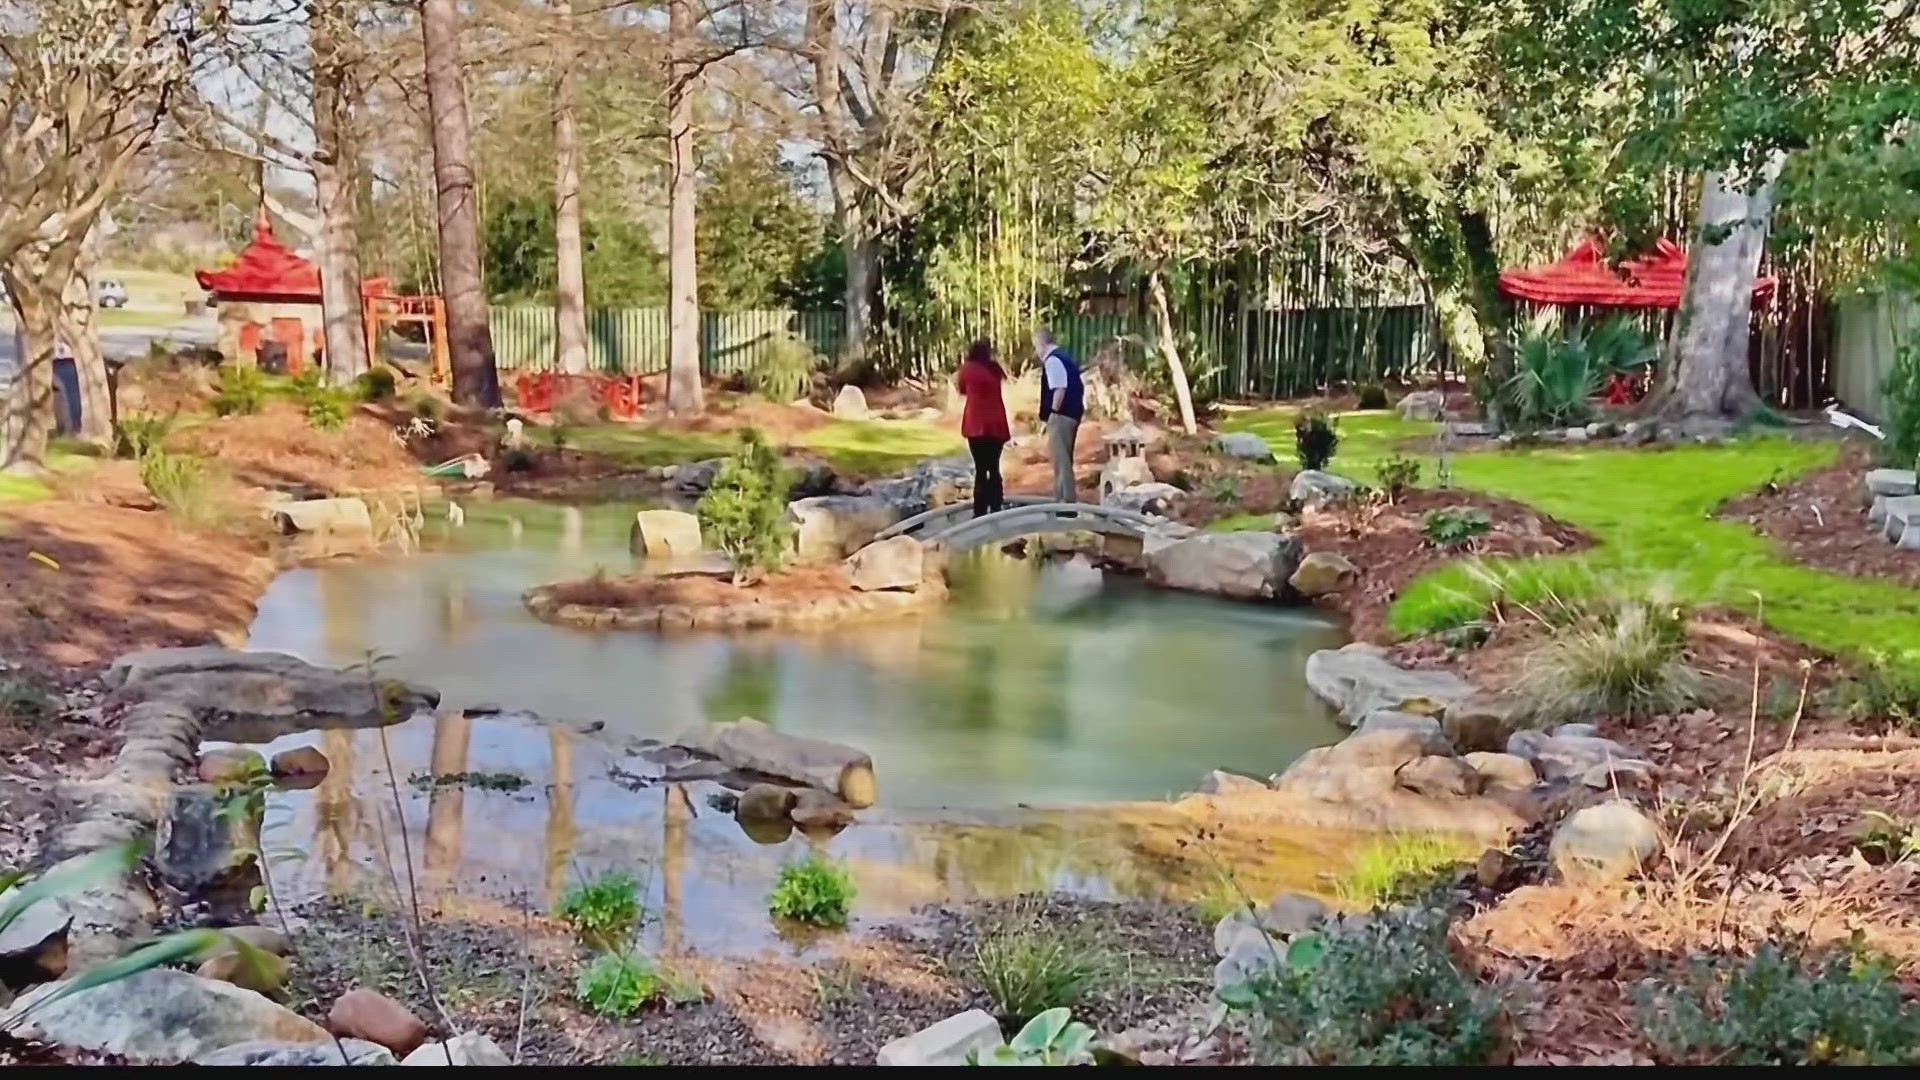 Recent renovations at the Well's Japanese garden in Newberry are worth showing off.